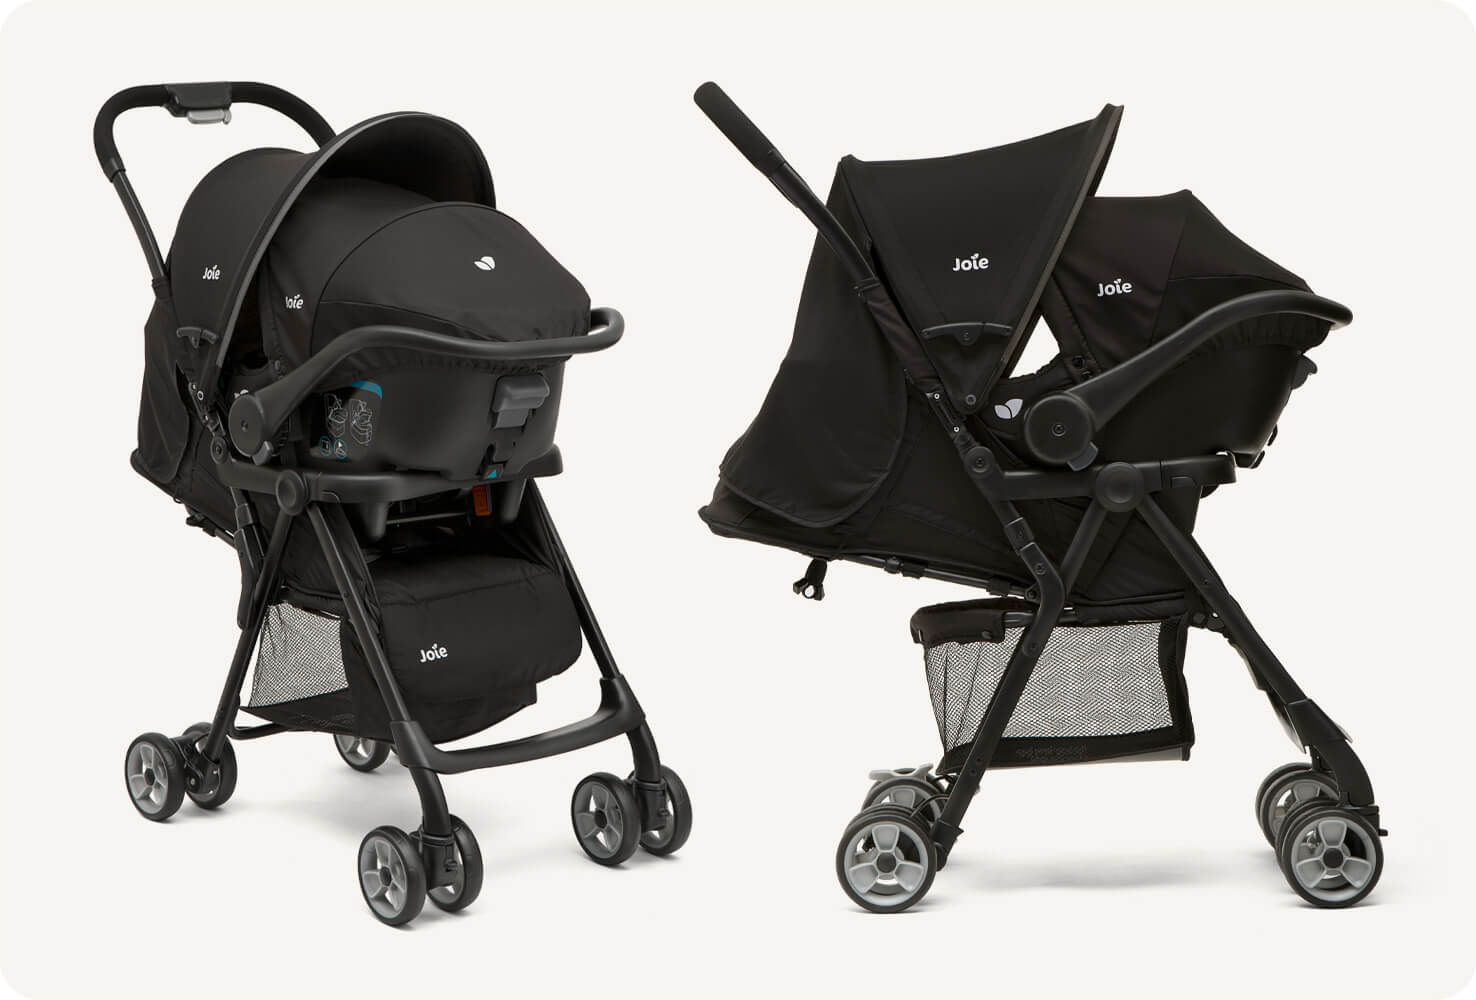  Two images of the Joie juva infant car seat on a stroller base side-by-side showing the travel system compatability from a right angle and profile view. 